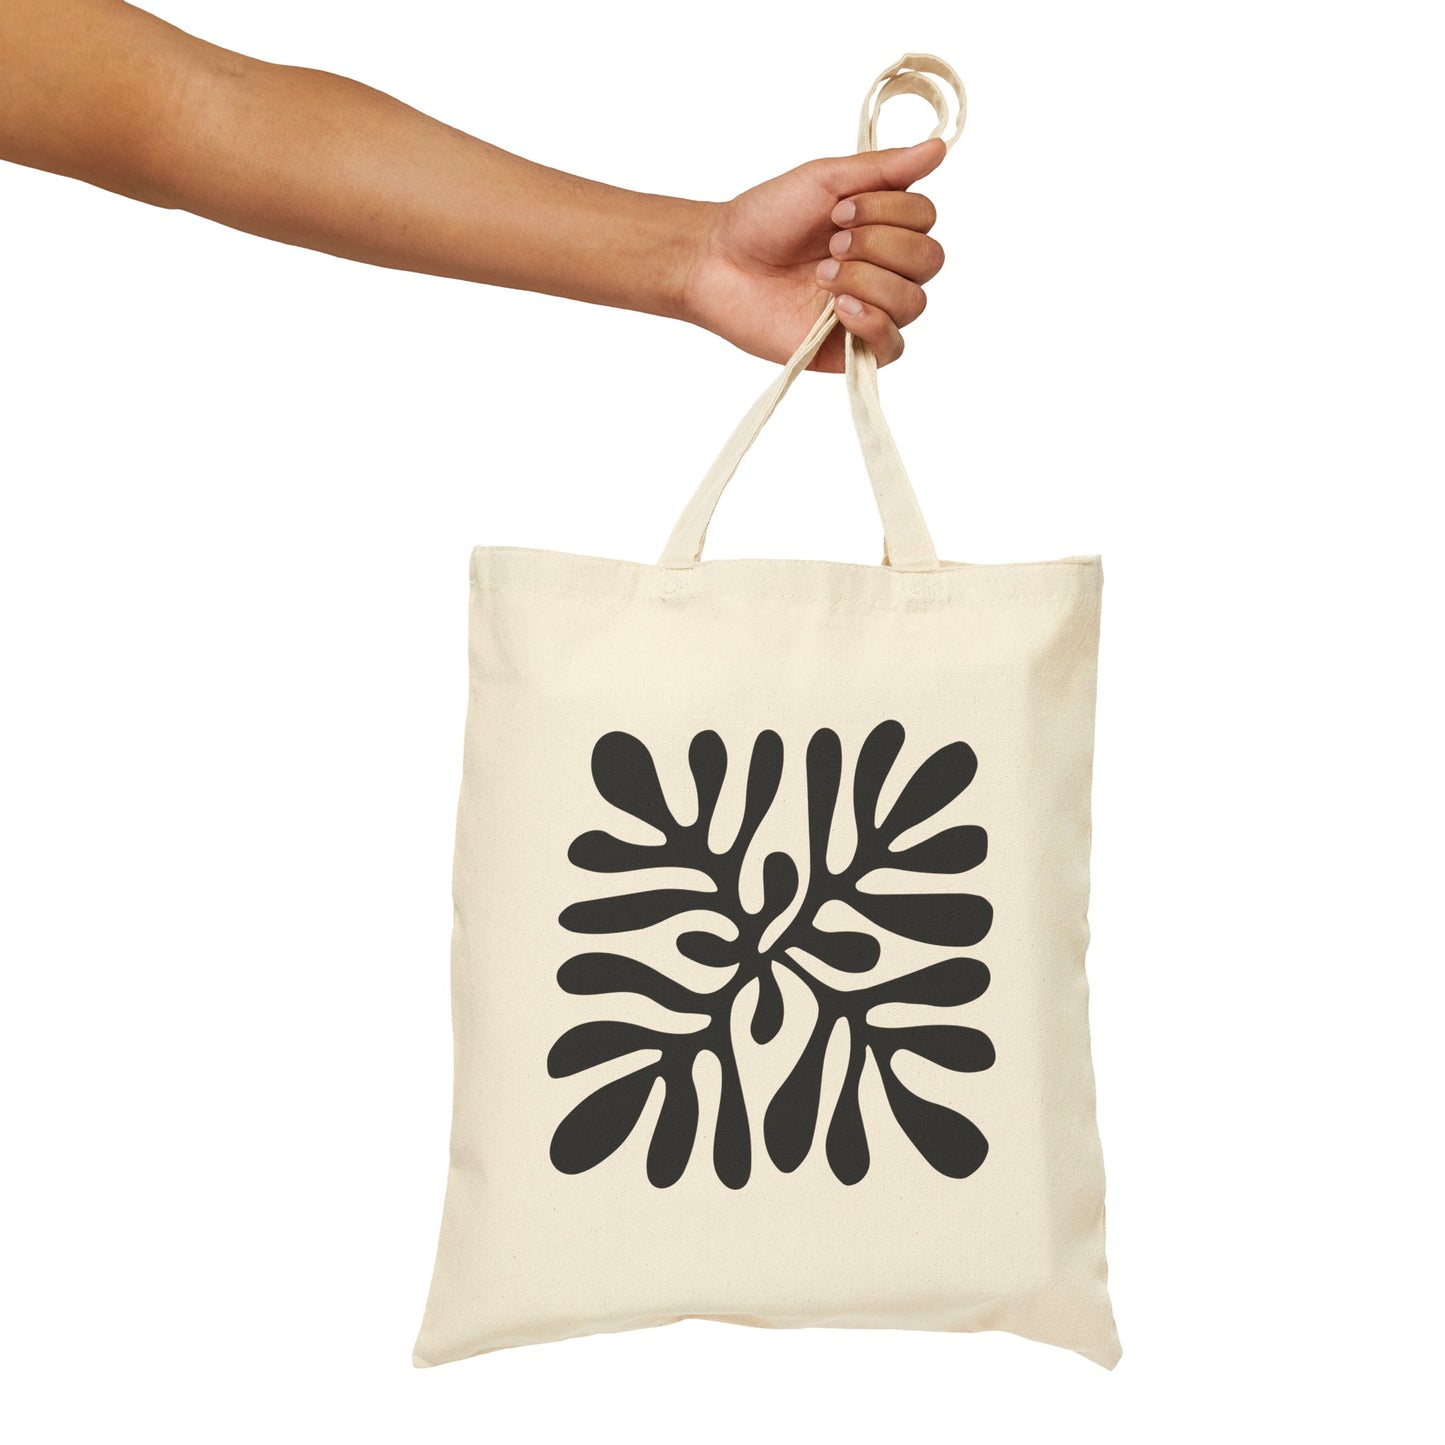 Matisse Black and white Canvas Tote Bag